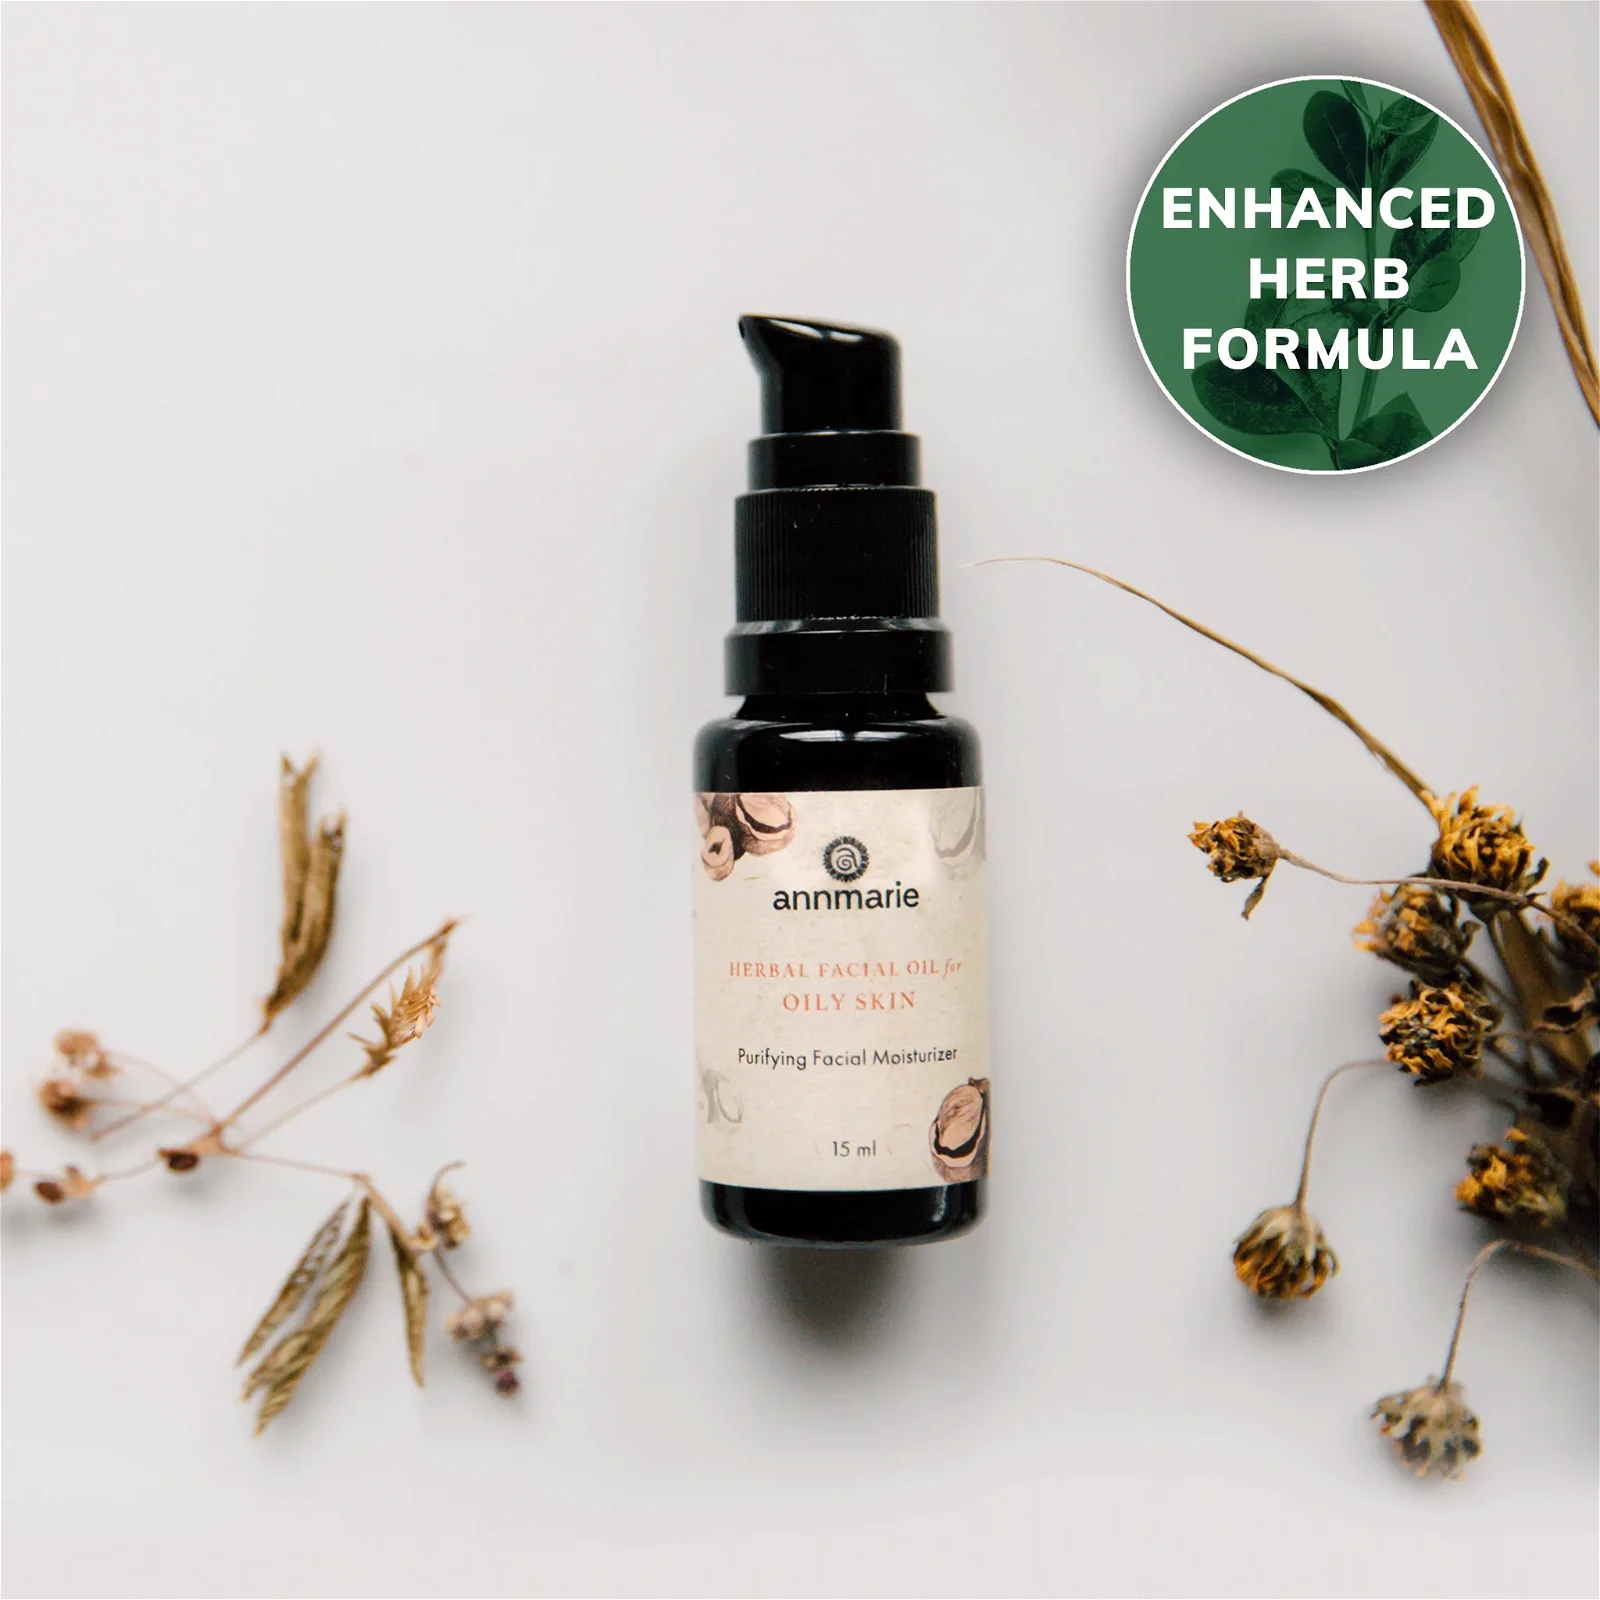 Image of Herbal Facial Oil for Oily Skin (15ml)